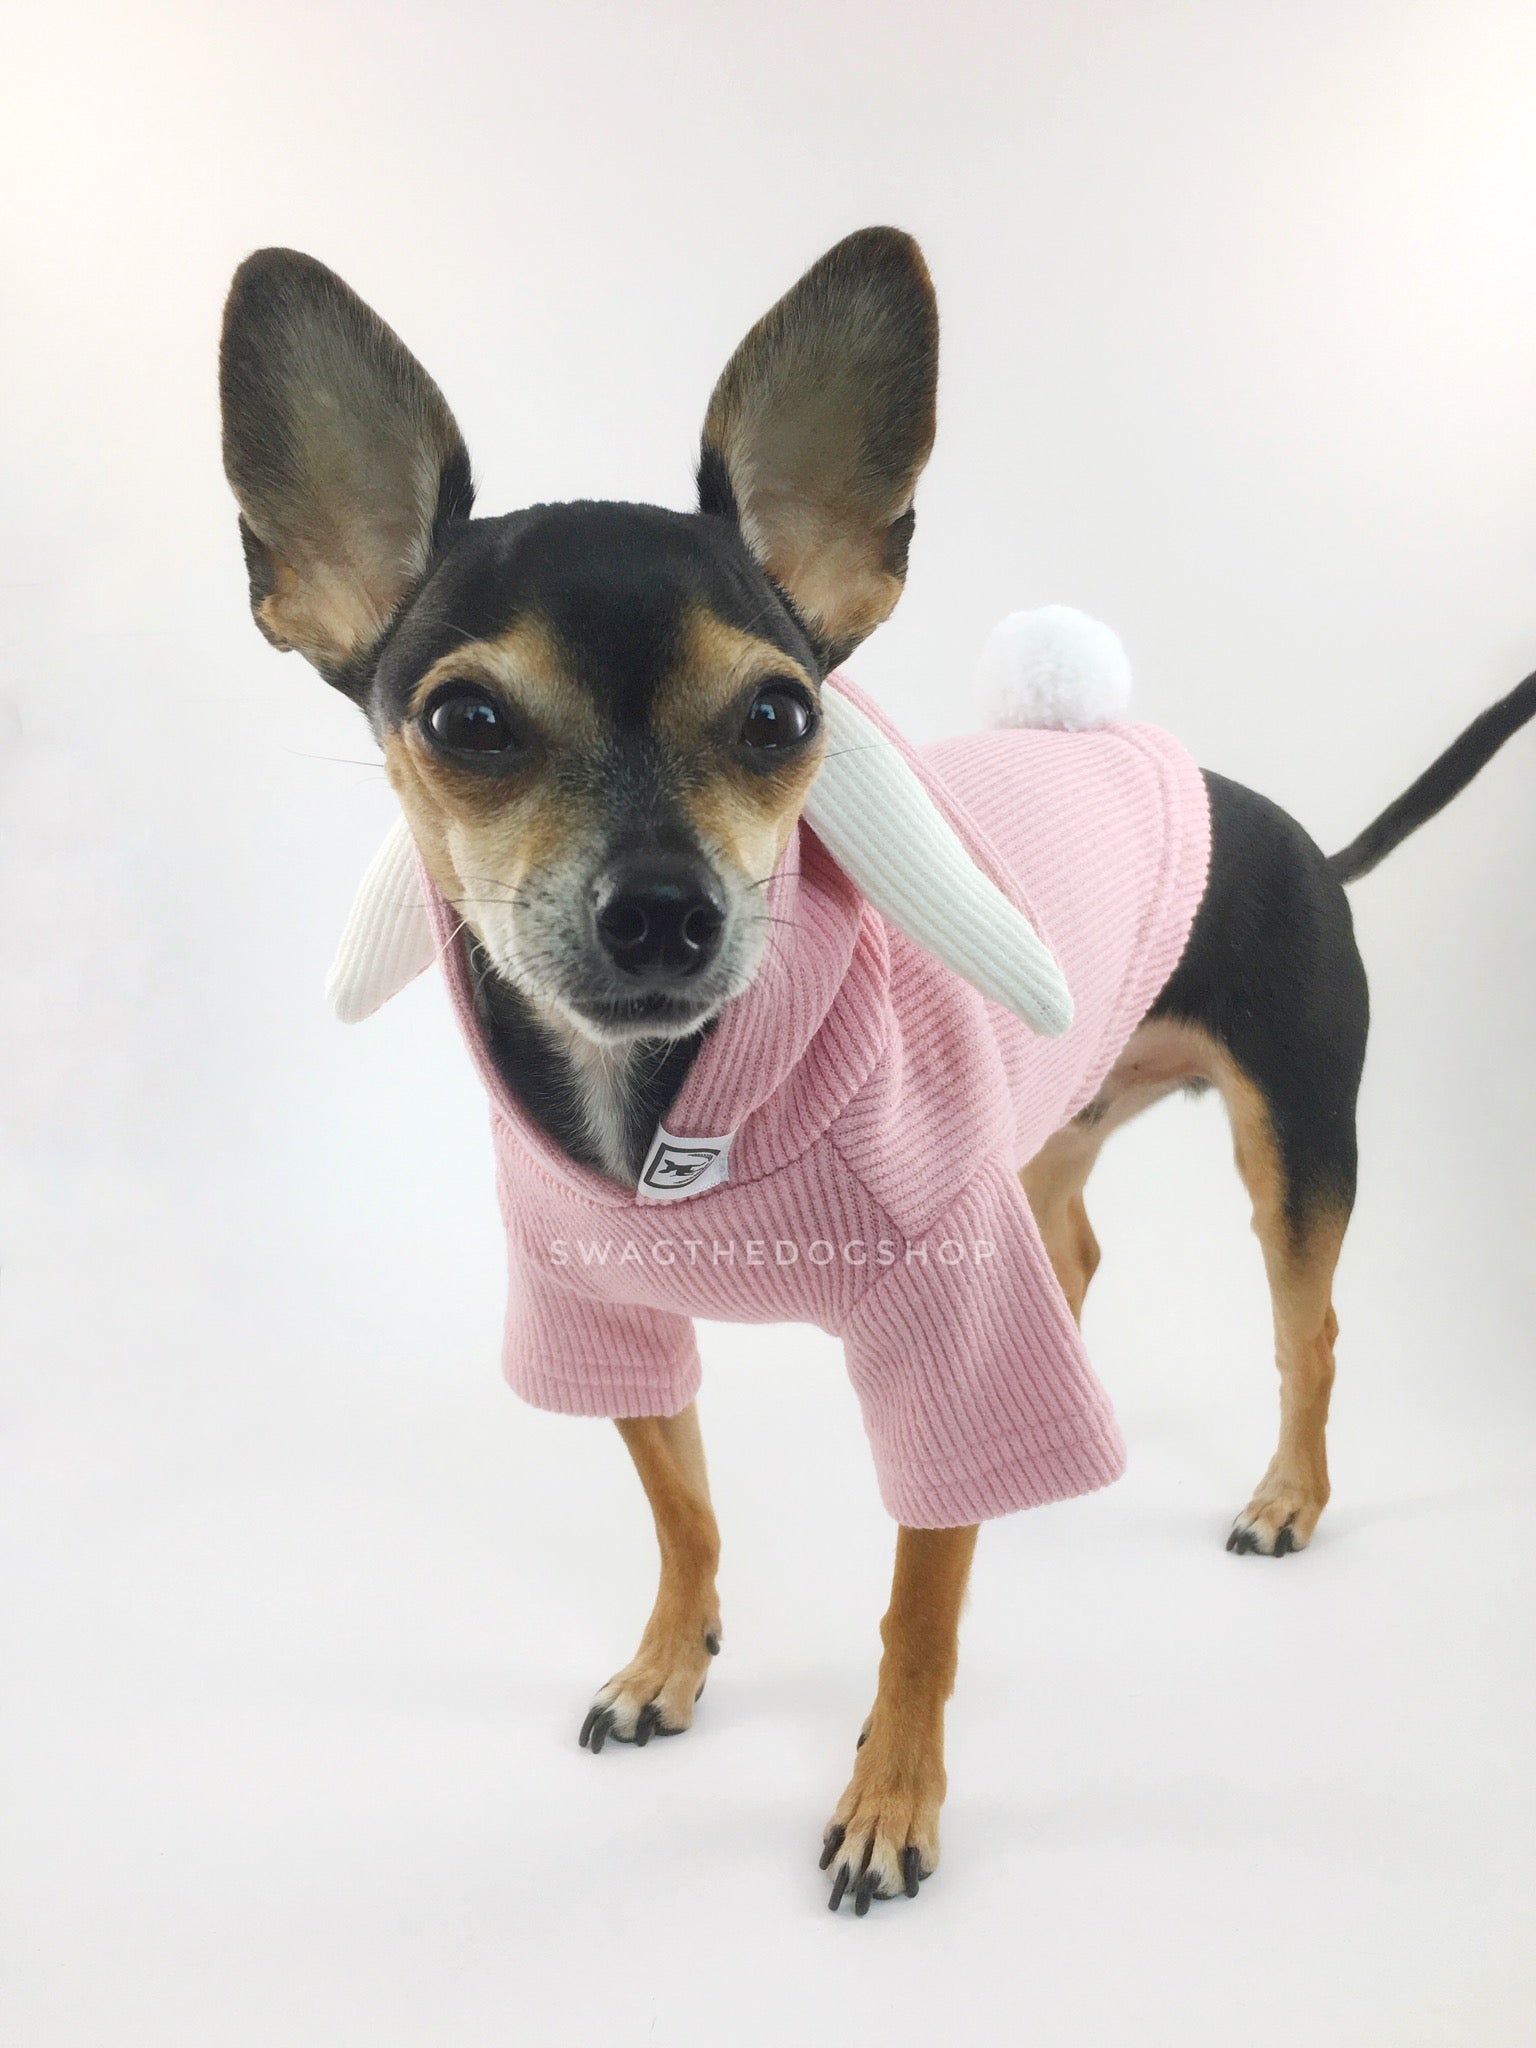 Pink Bunny Hoodie - Side View of Cute Chihuahua Dog Wearing Hoodie. Pink Bunny Hoodie with Pom Pom Tail